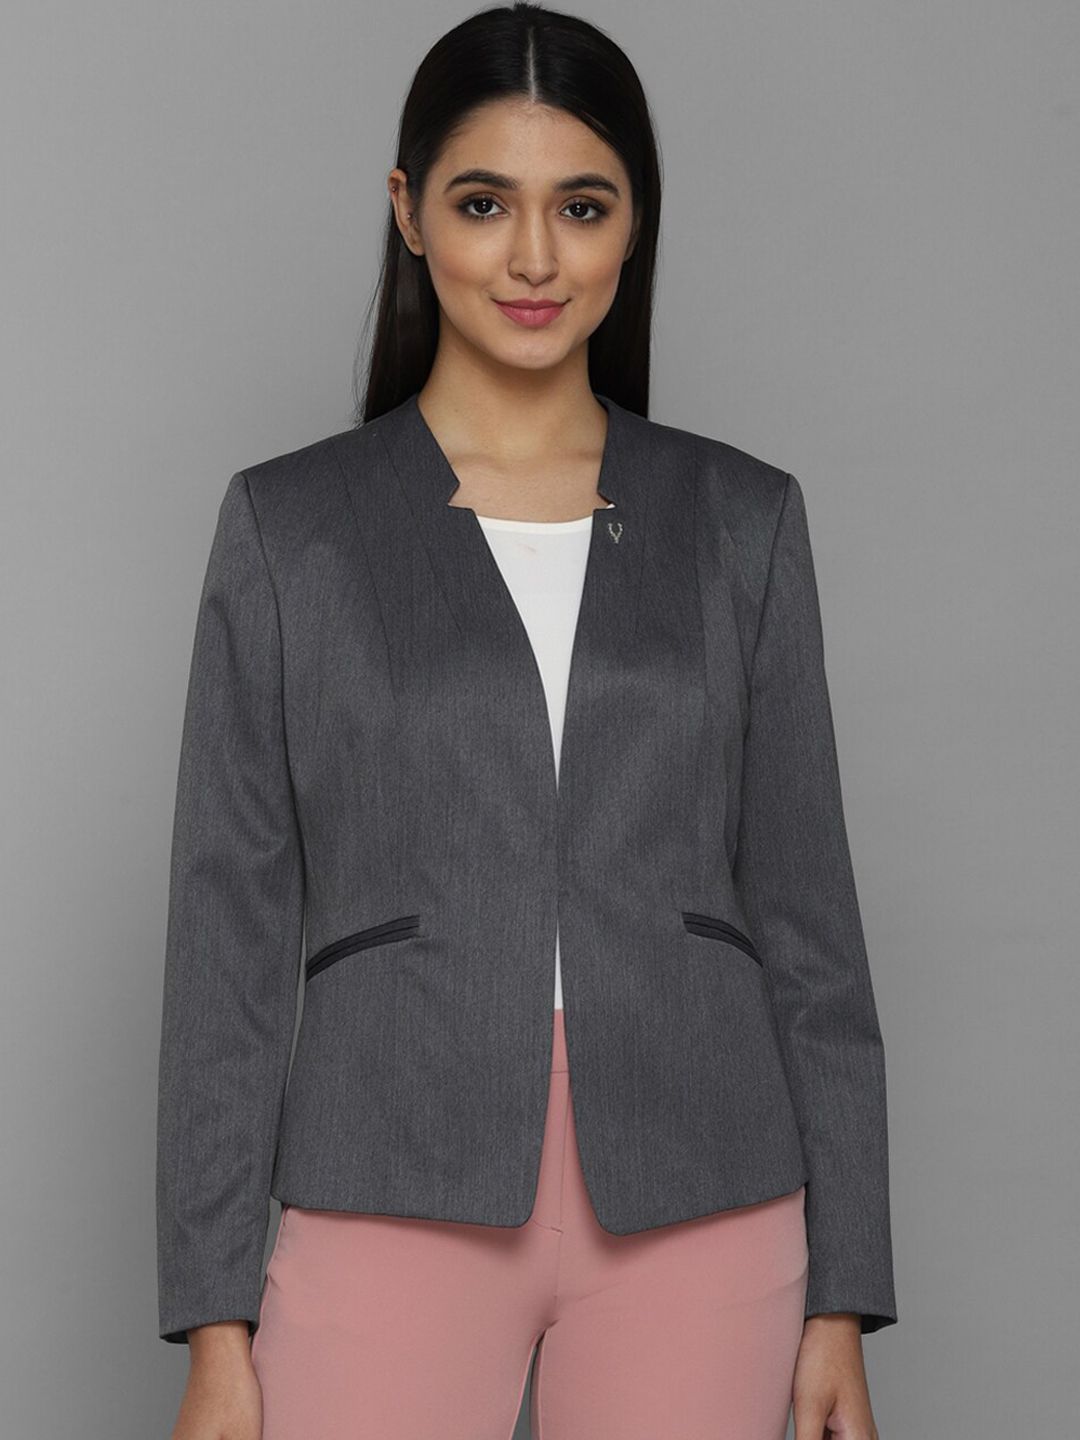 Allen Solly Woman Grey Solid Single Breasted Blazer Price in India